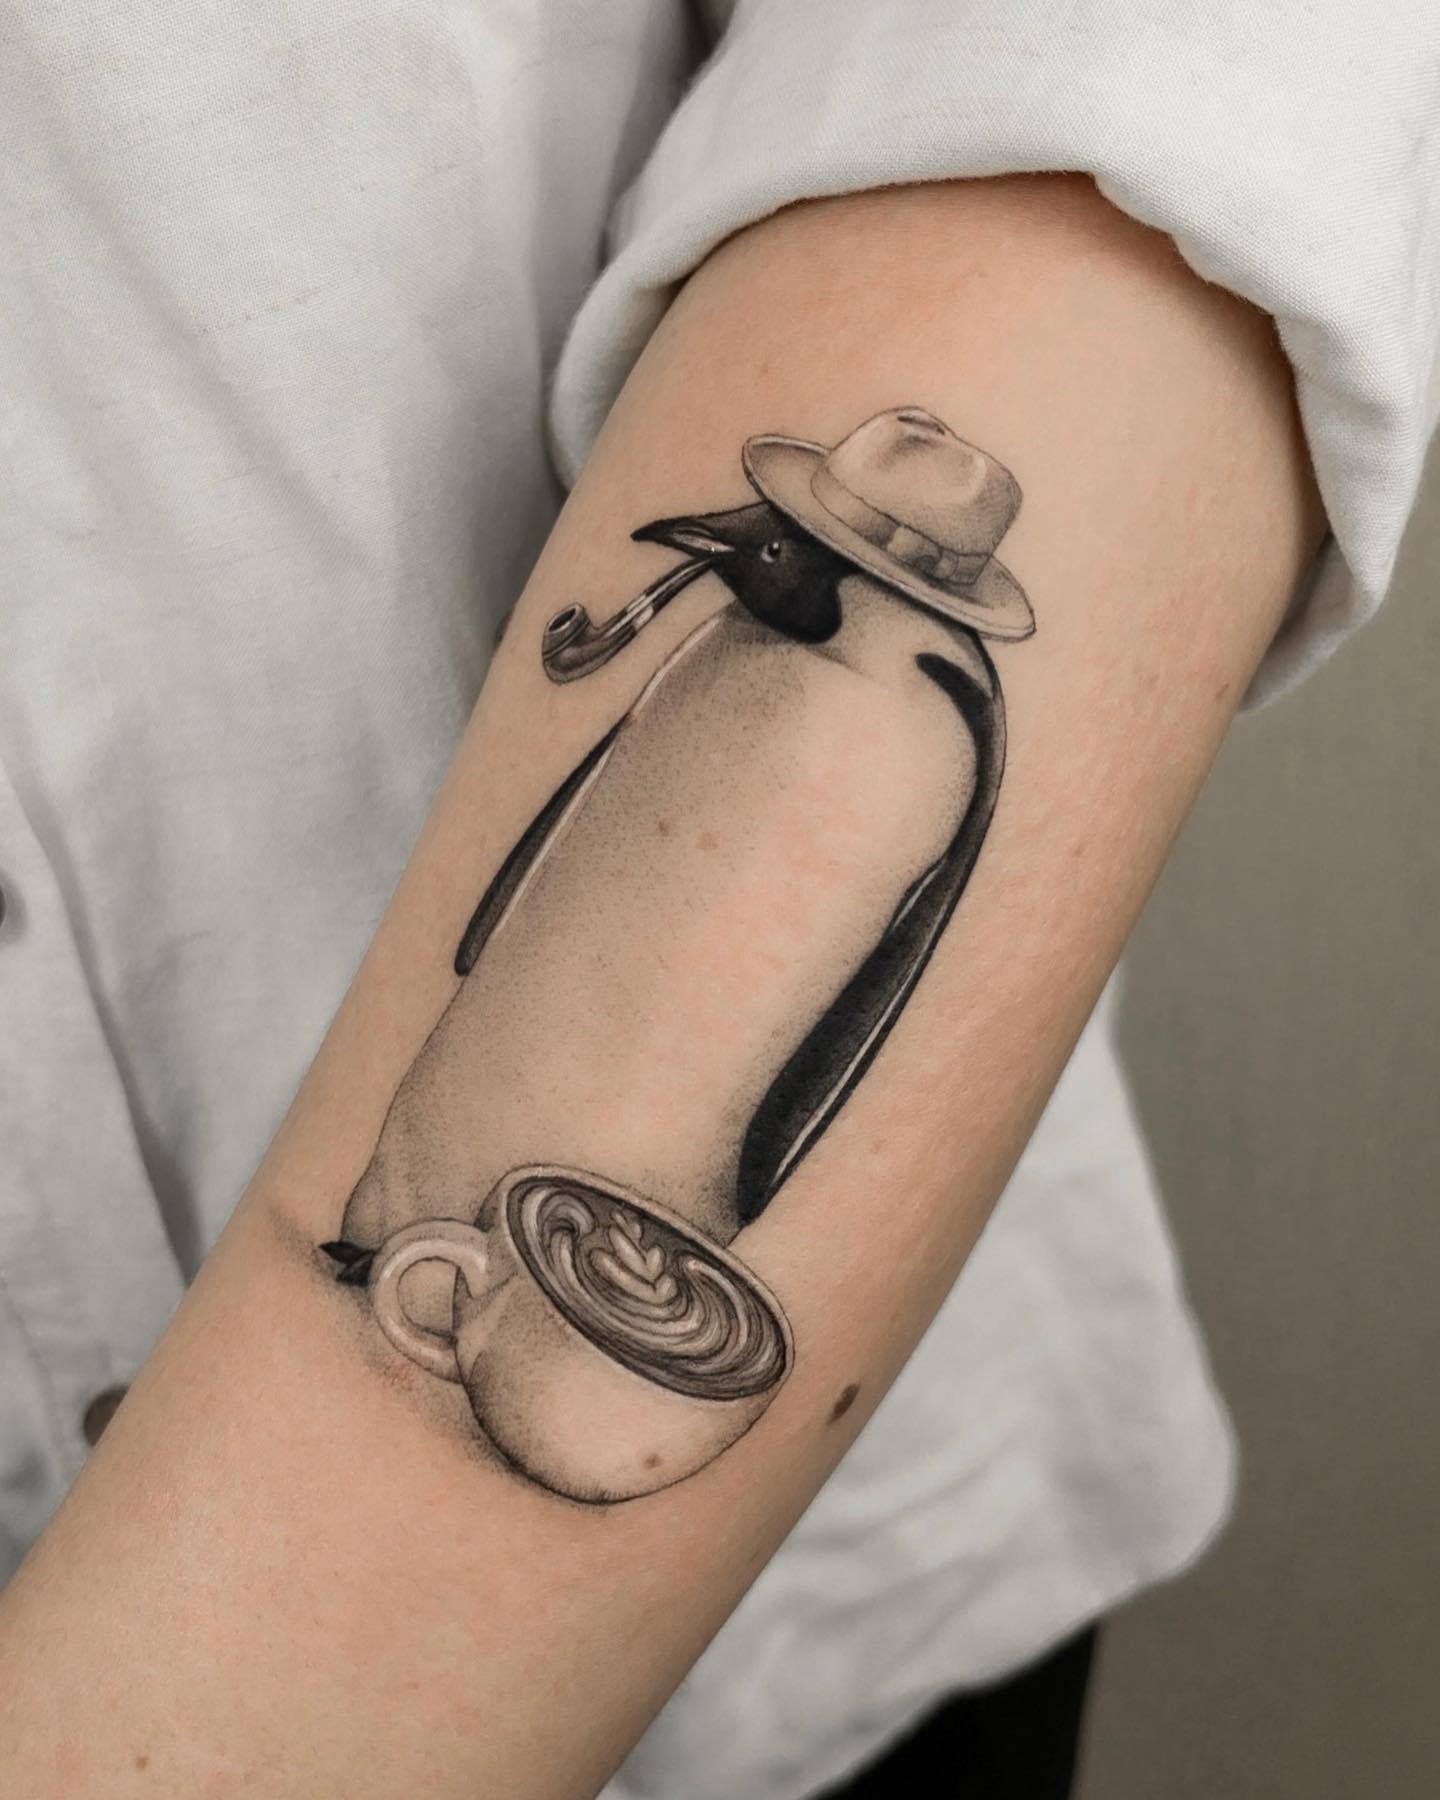 Are you addicted to coffee? Then, why not a penguin is addicted to it? Let's have fun with your penguin tattoo like the one above.